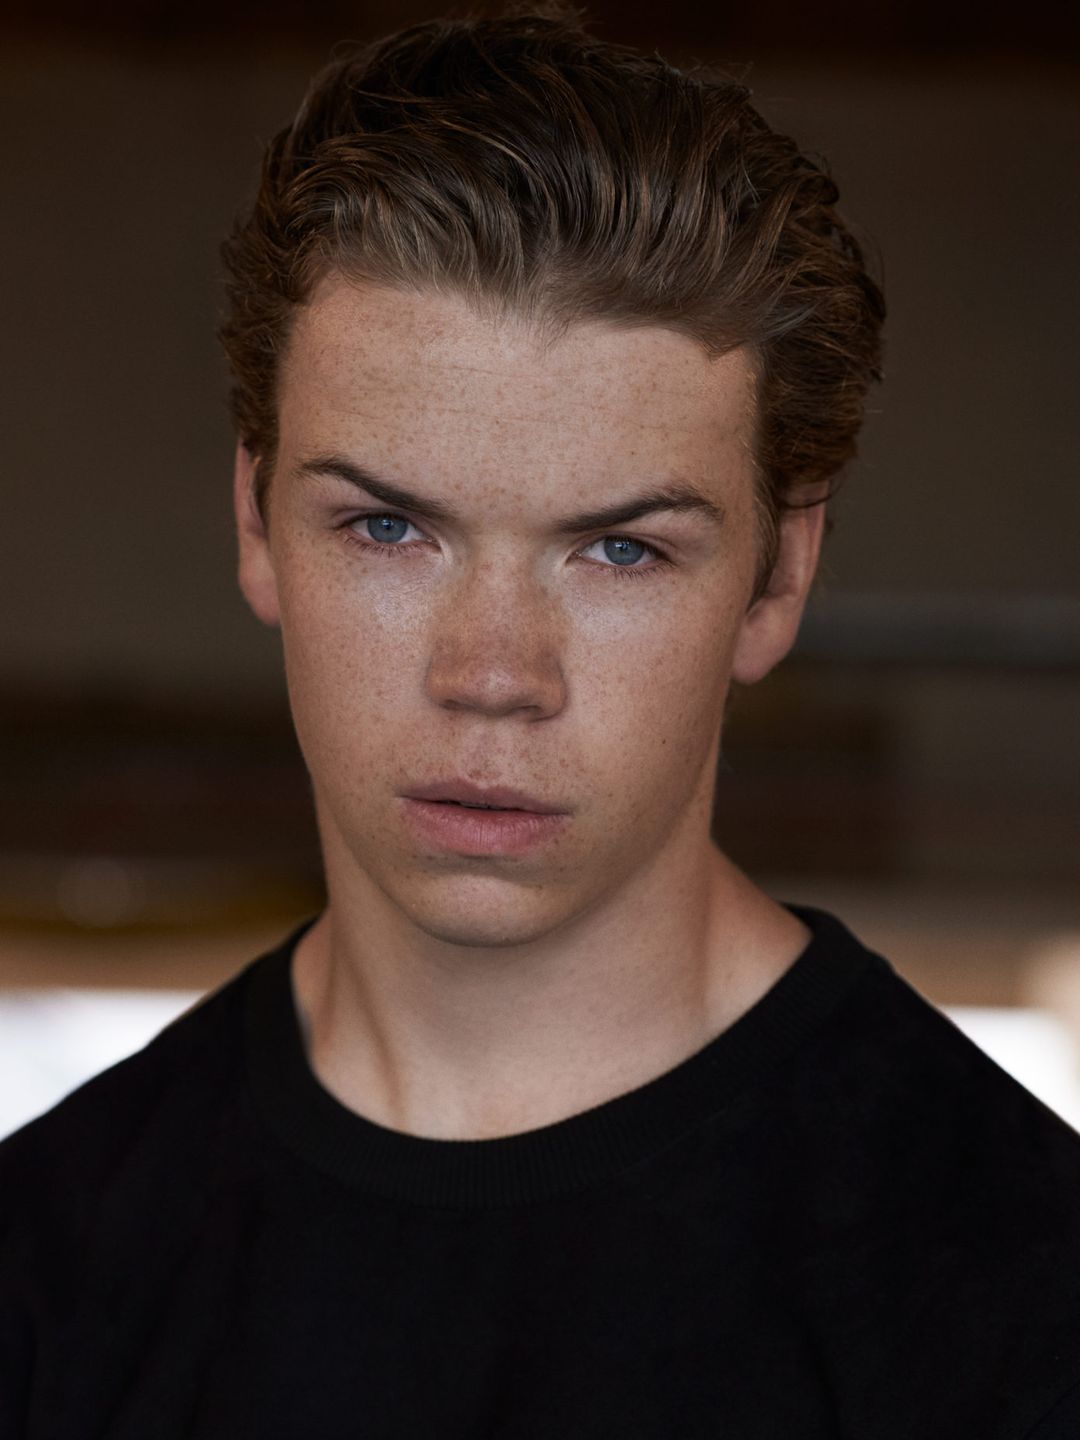 Will Poulter who is his father